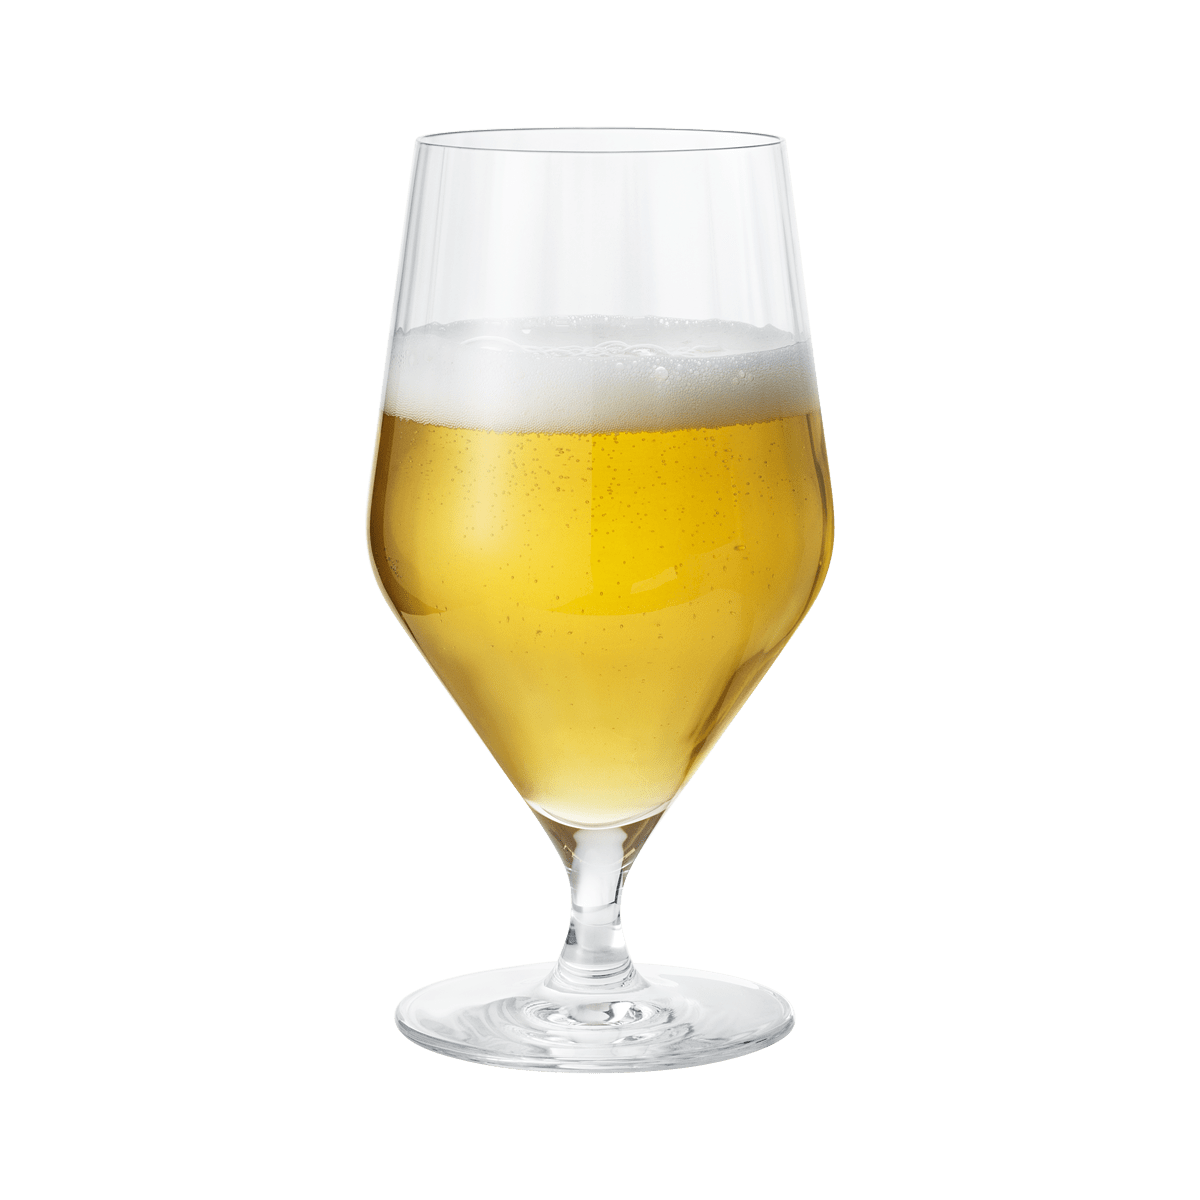 https://res.cloudinary.com/georgjensen/image/upload/f_auto,dpr_2/w_auto,c_scale/products/images/hi-res/10019917_BERNADOTTE_BEER_GLAS_GLASS_CRYSTALLINE_52CL_6PCS?_i=AG